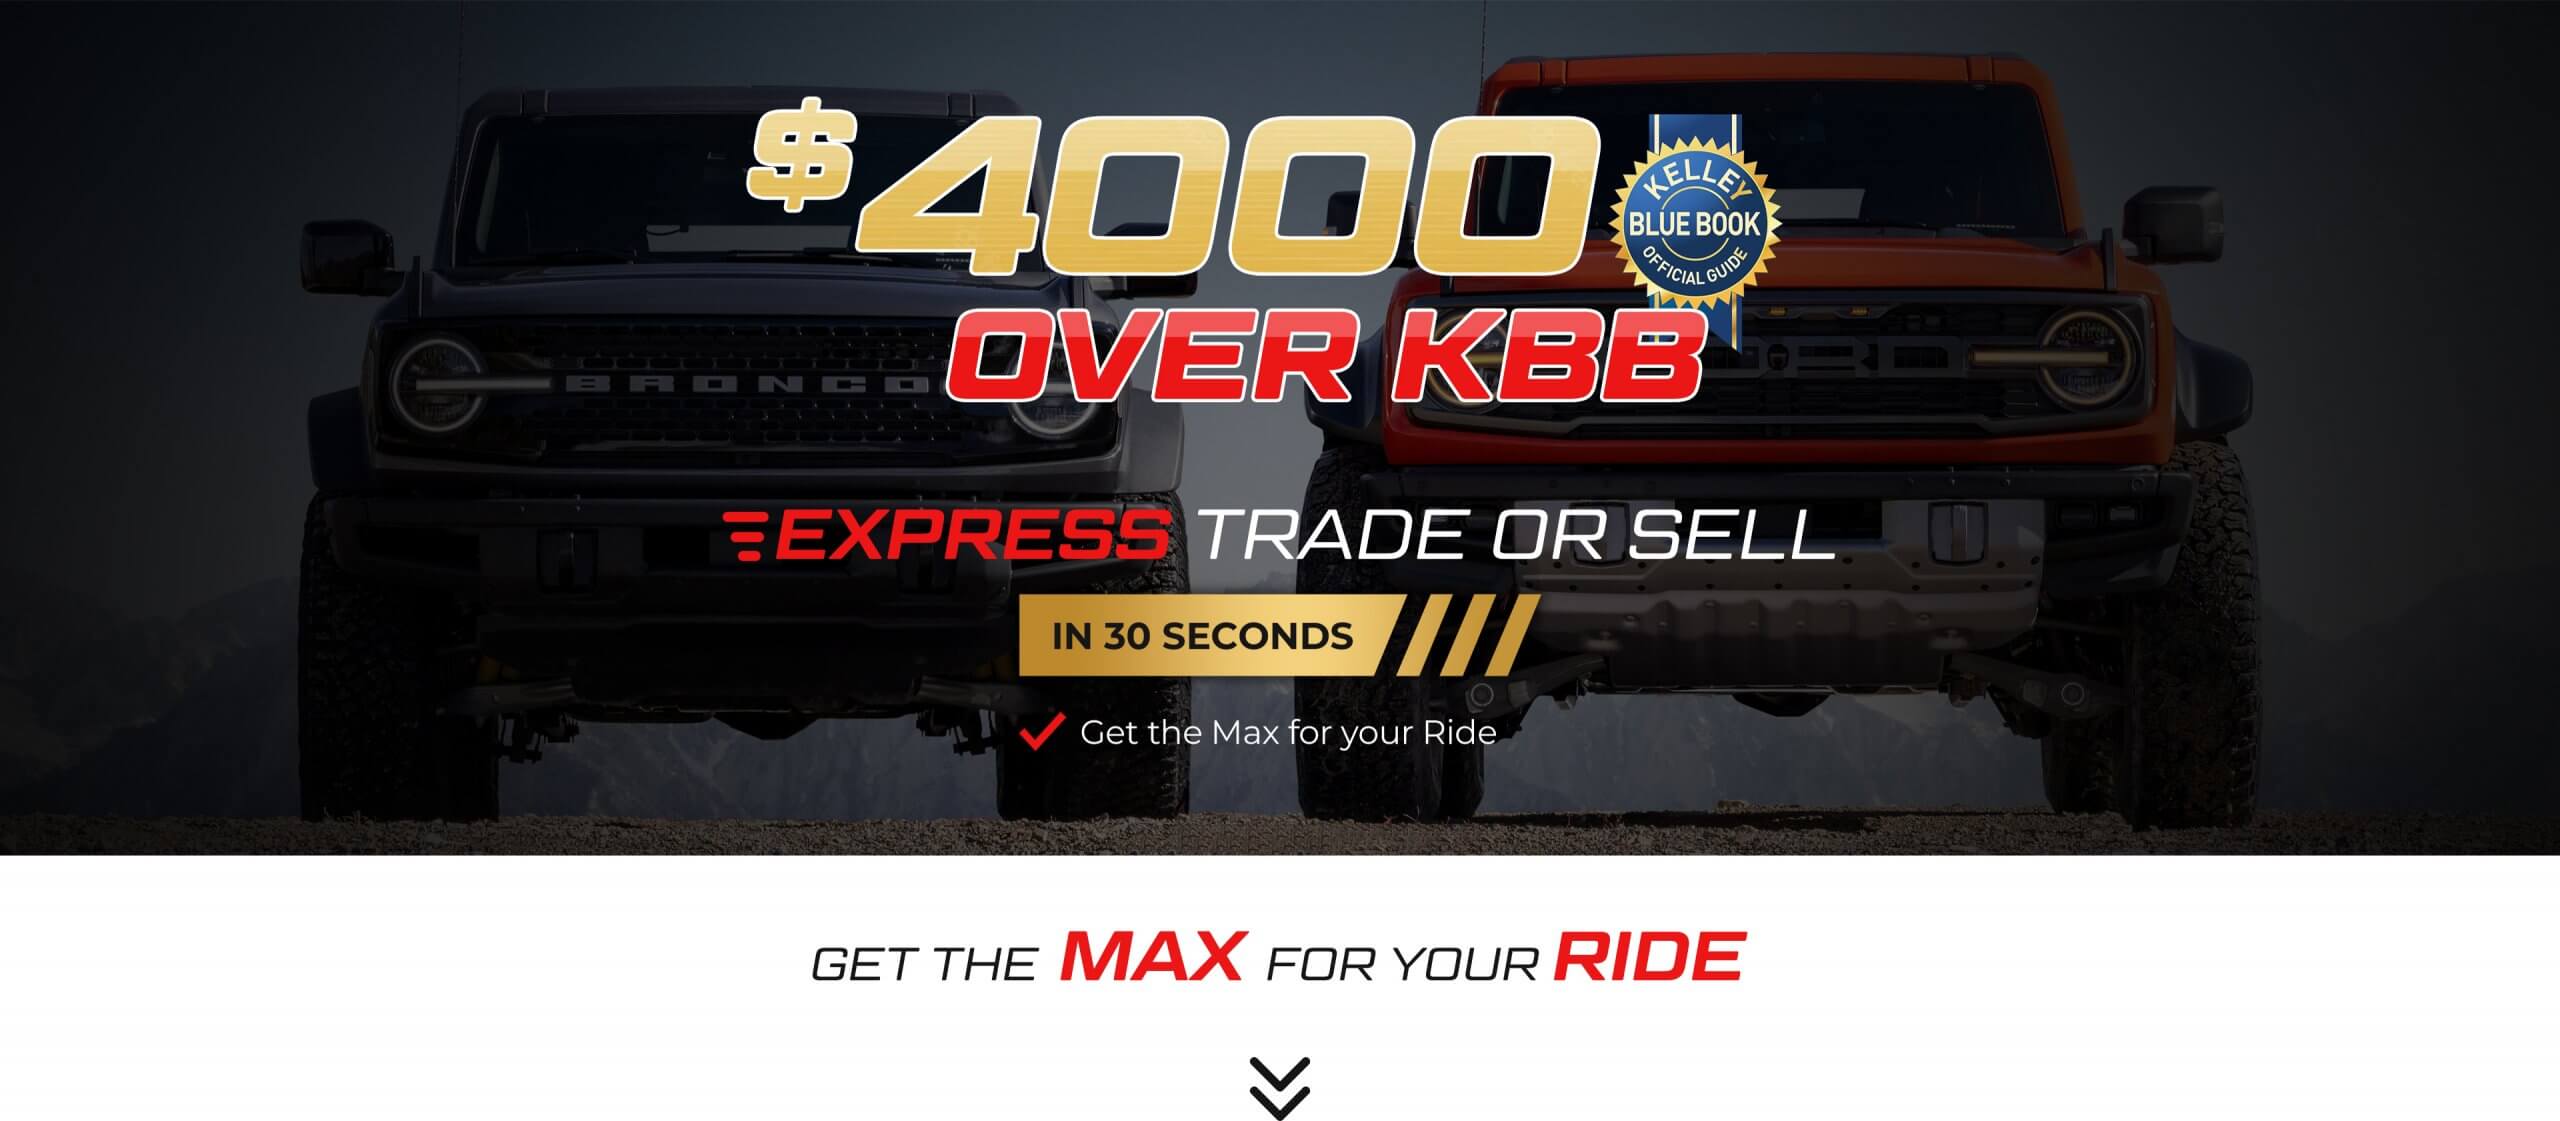 $4000 over KBB. Express trade or sell in 30 seconds. Get the max for your ride.